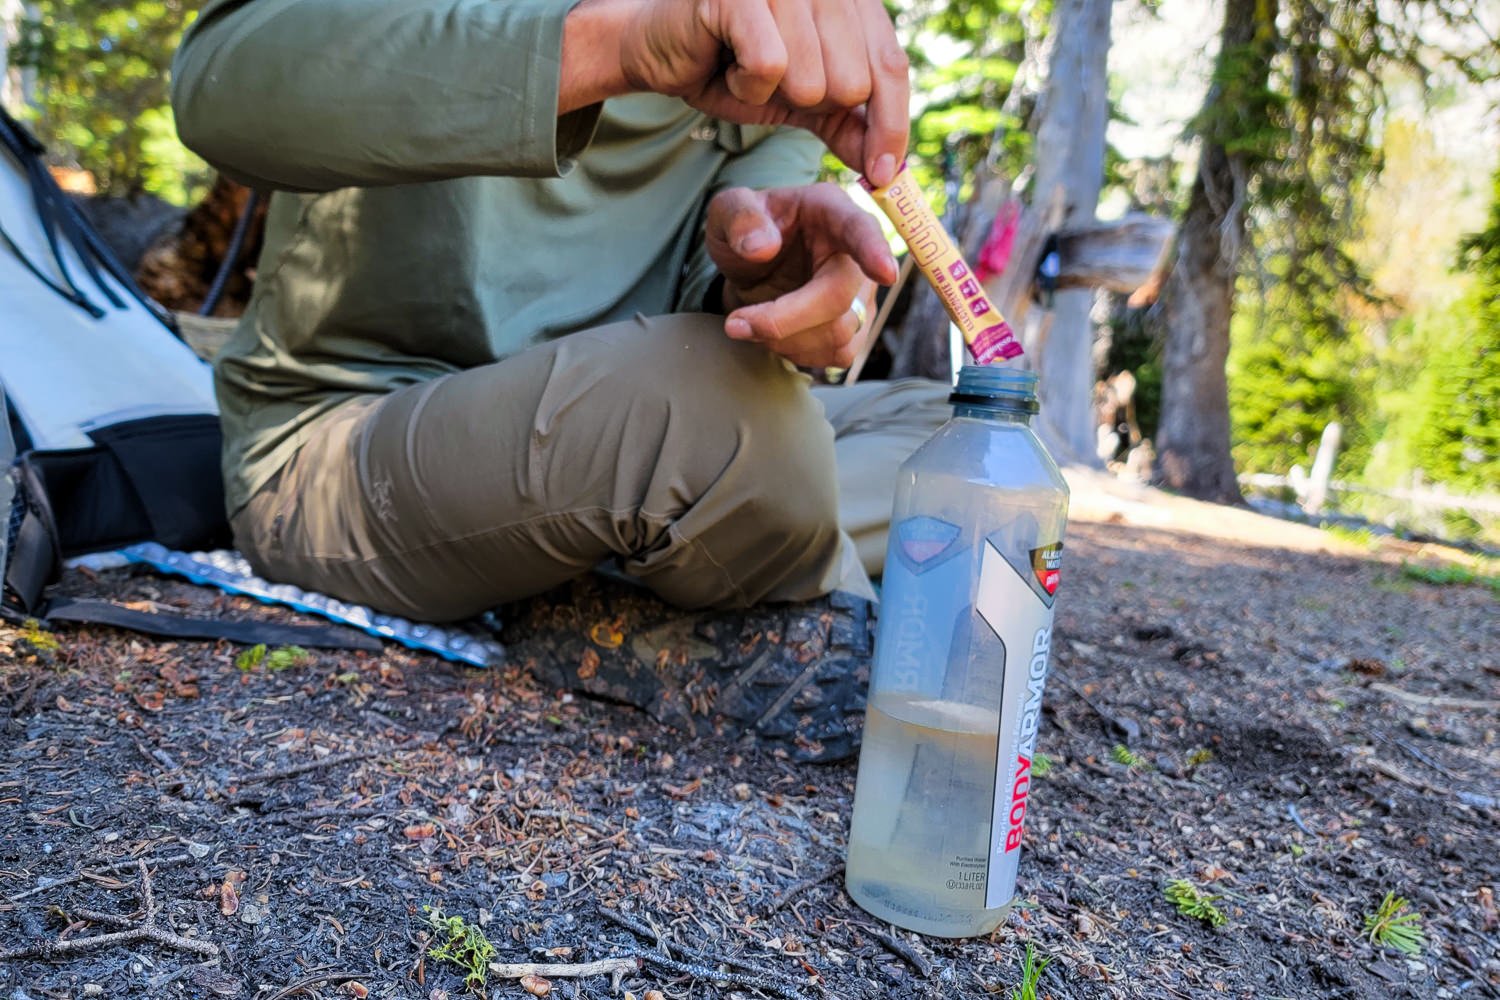 A hiker pouring Ultima Replenisher electrolyte mix into a water bottle